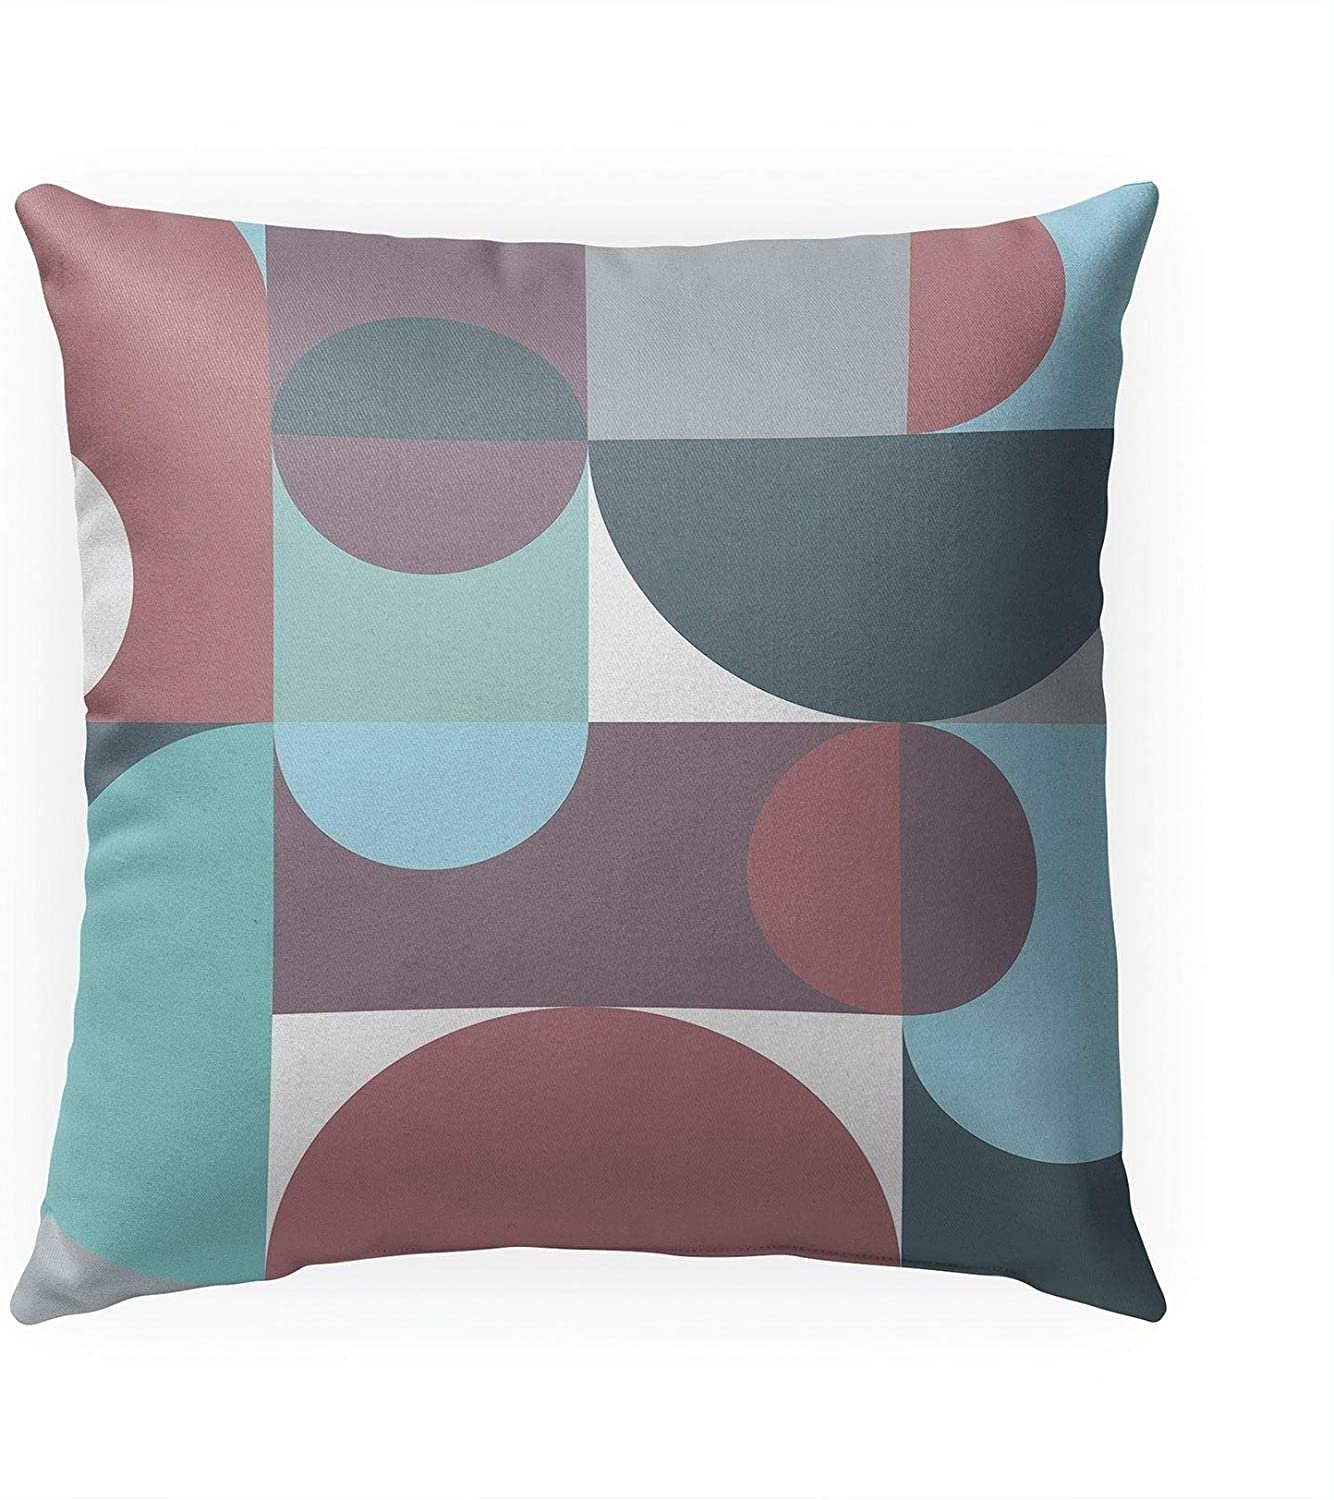 Geometry Spherical Cool Indoor|Outdoor Pillow by Melanie 18x18 Blue Geometric Modern Contemporary Polyester Removable Cover